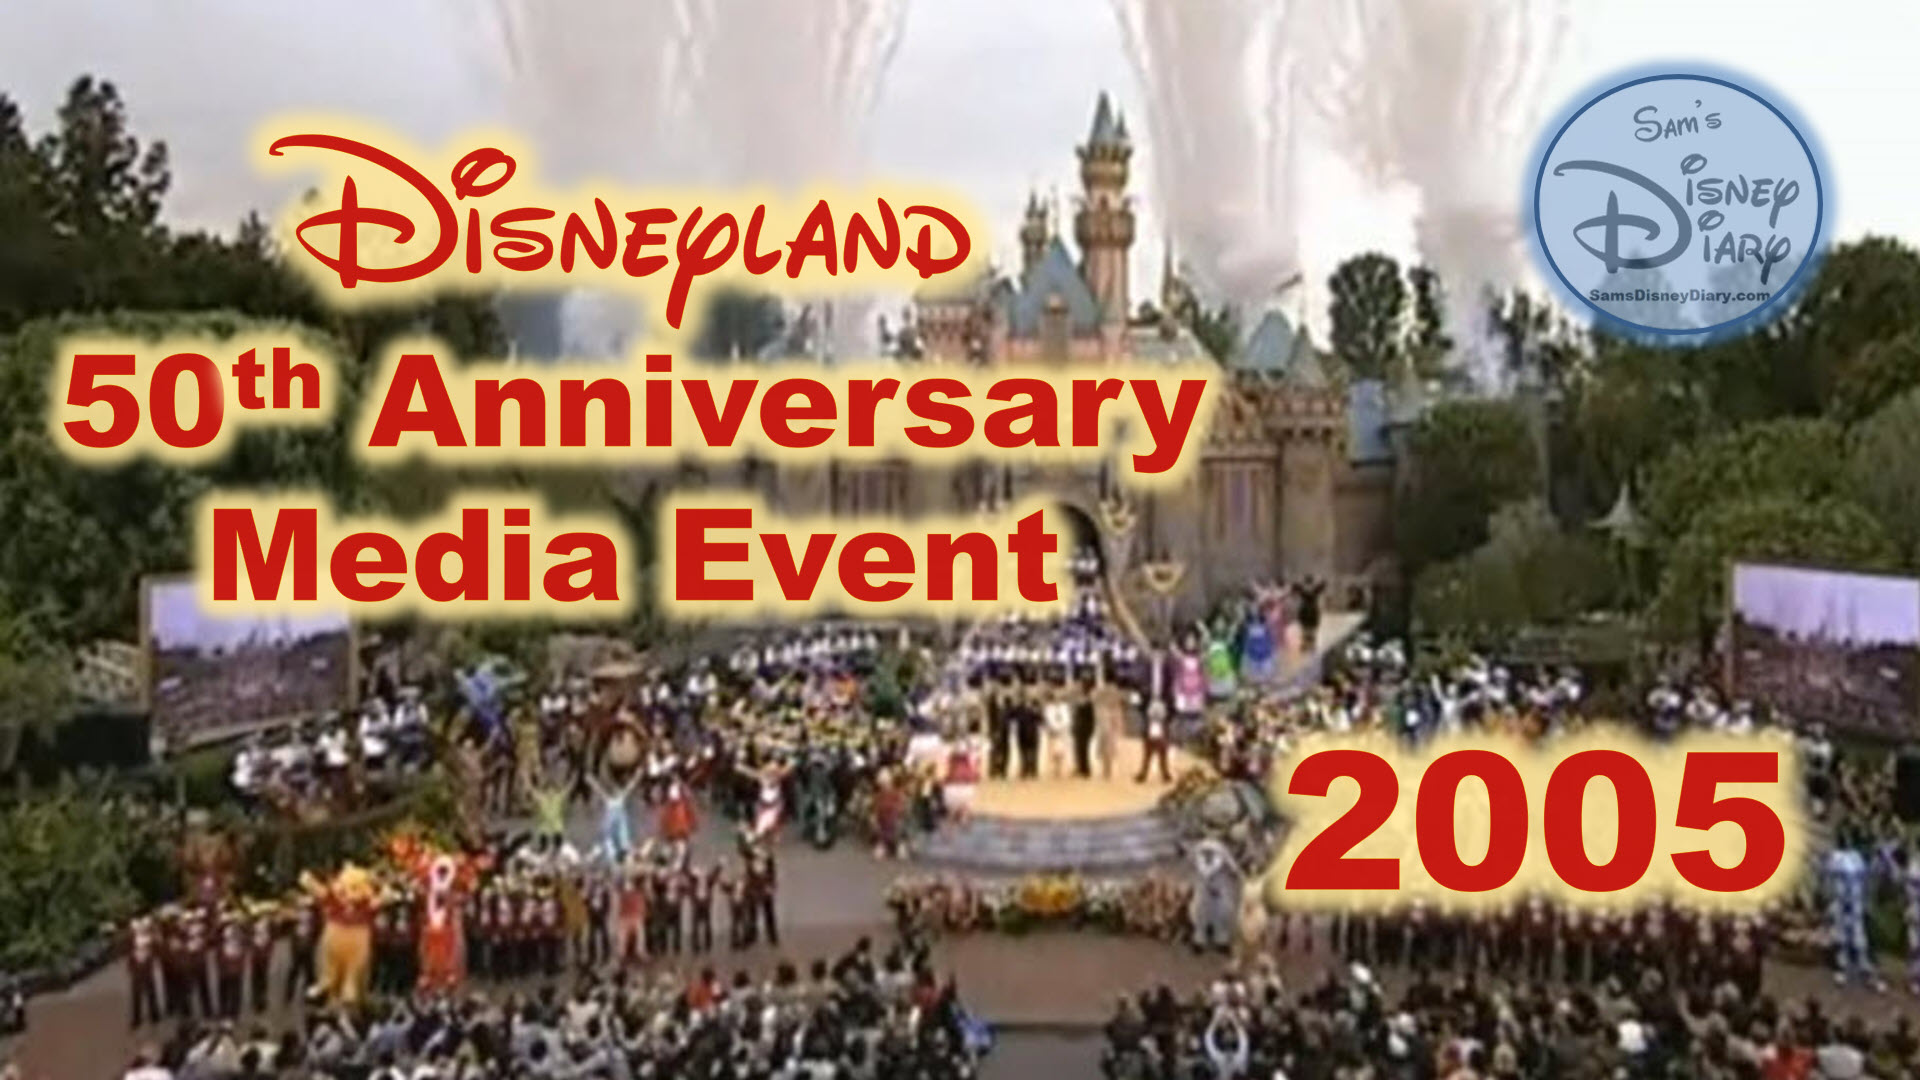 Disneyland 50th Anniversary Media Event (May 4, 2005) Happiest homecoming on Earth